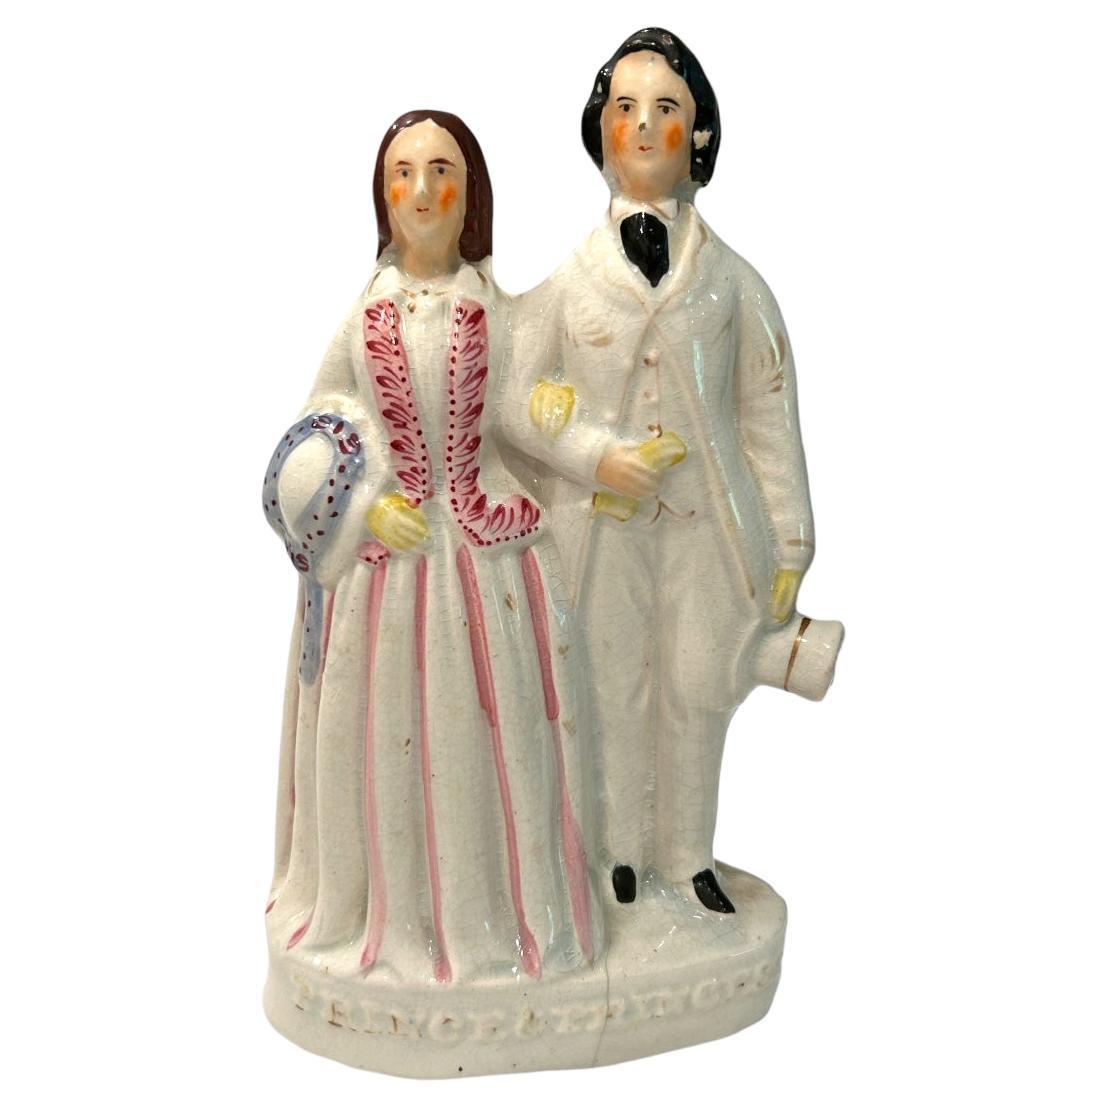 Antique 19th C. English Staffordshire Figurine “the Prince & Princess” of Wales For Sale